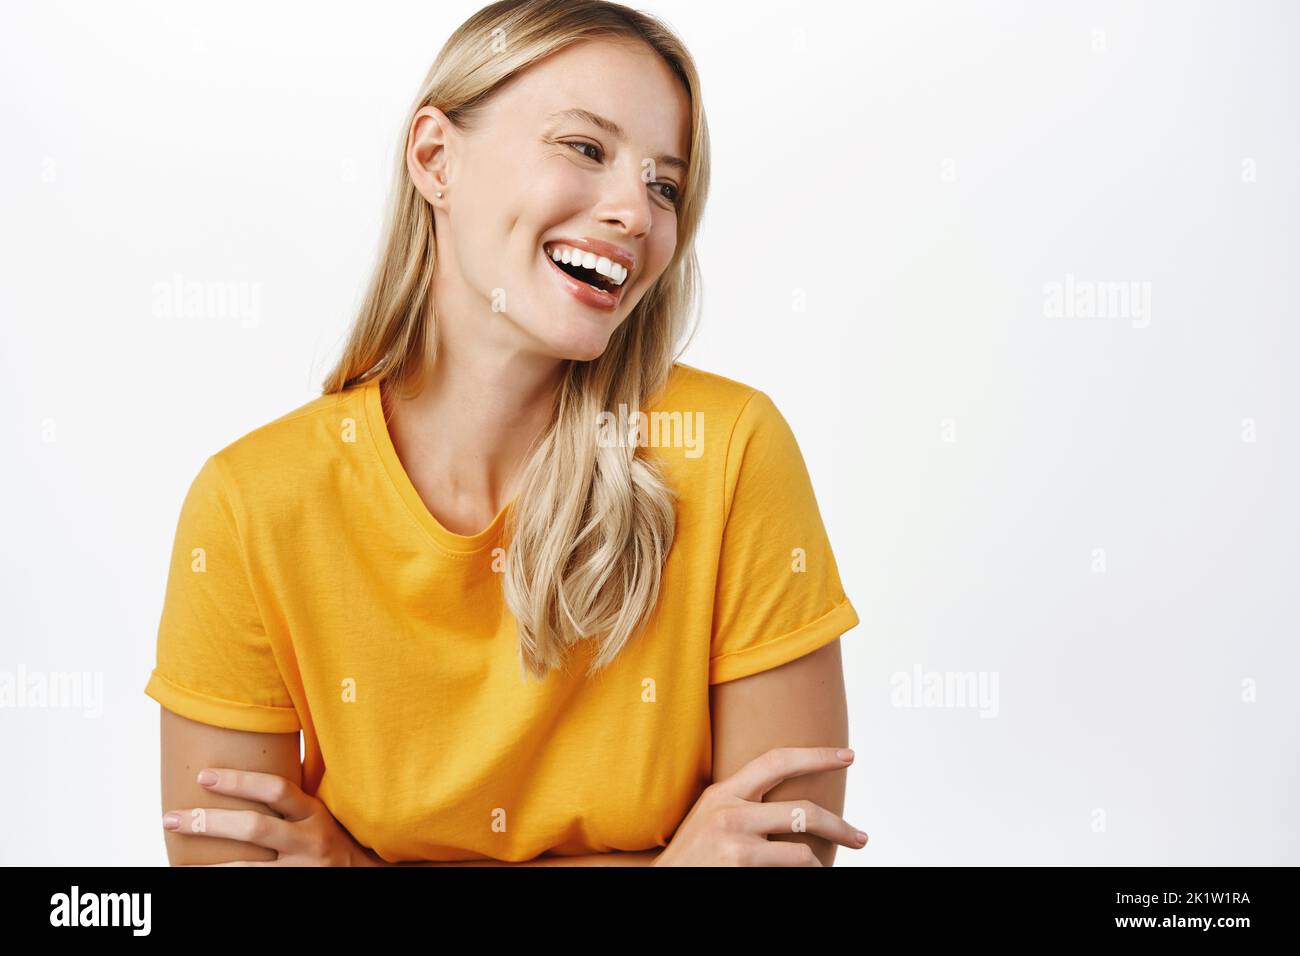 Portrit of beautiful modern woman with natural blond hair, white smile, clear perfect skin, laughing and smiling, standing in yellow t-shirt over whit Stock Photo